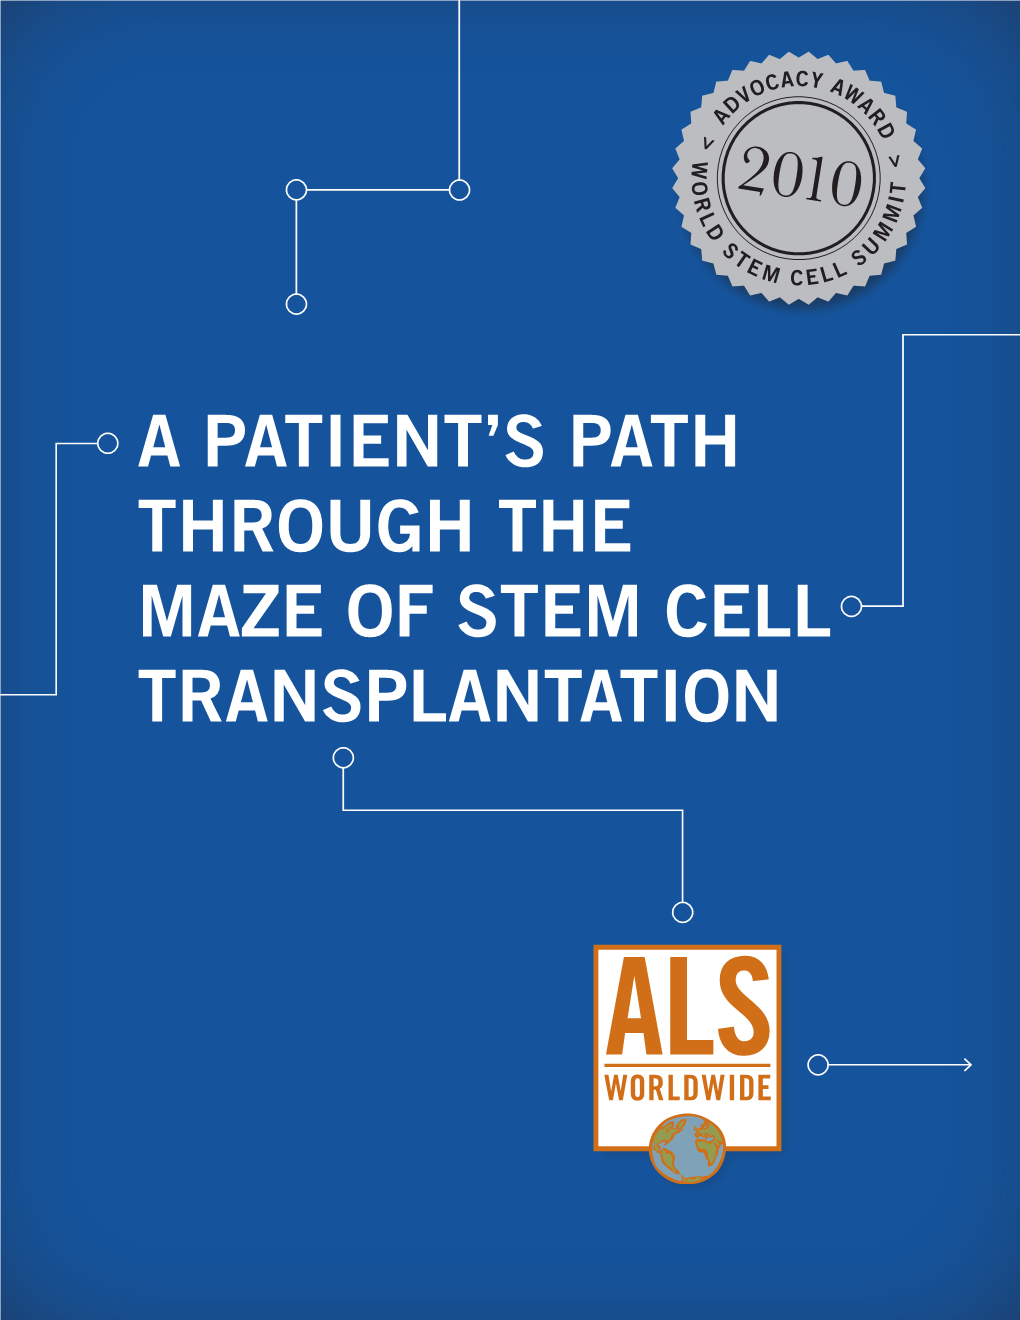 A Patient's Path Through the Maze of Stem Cell Transplantation